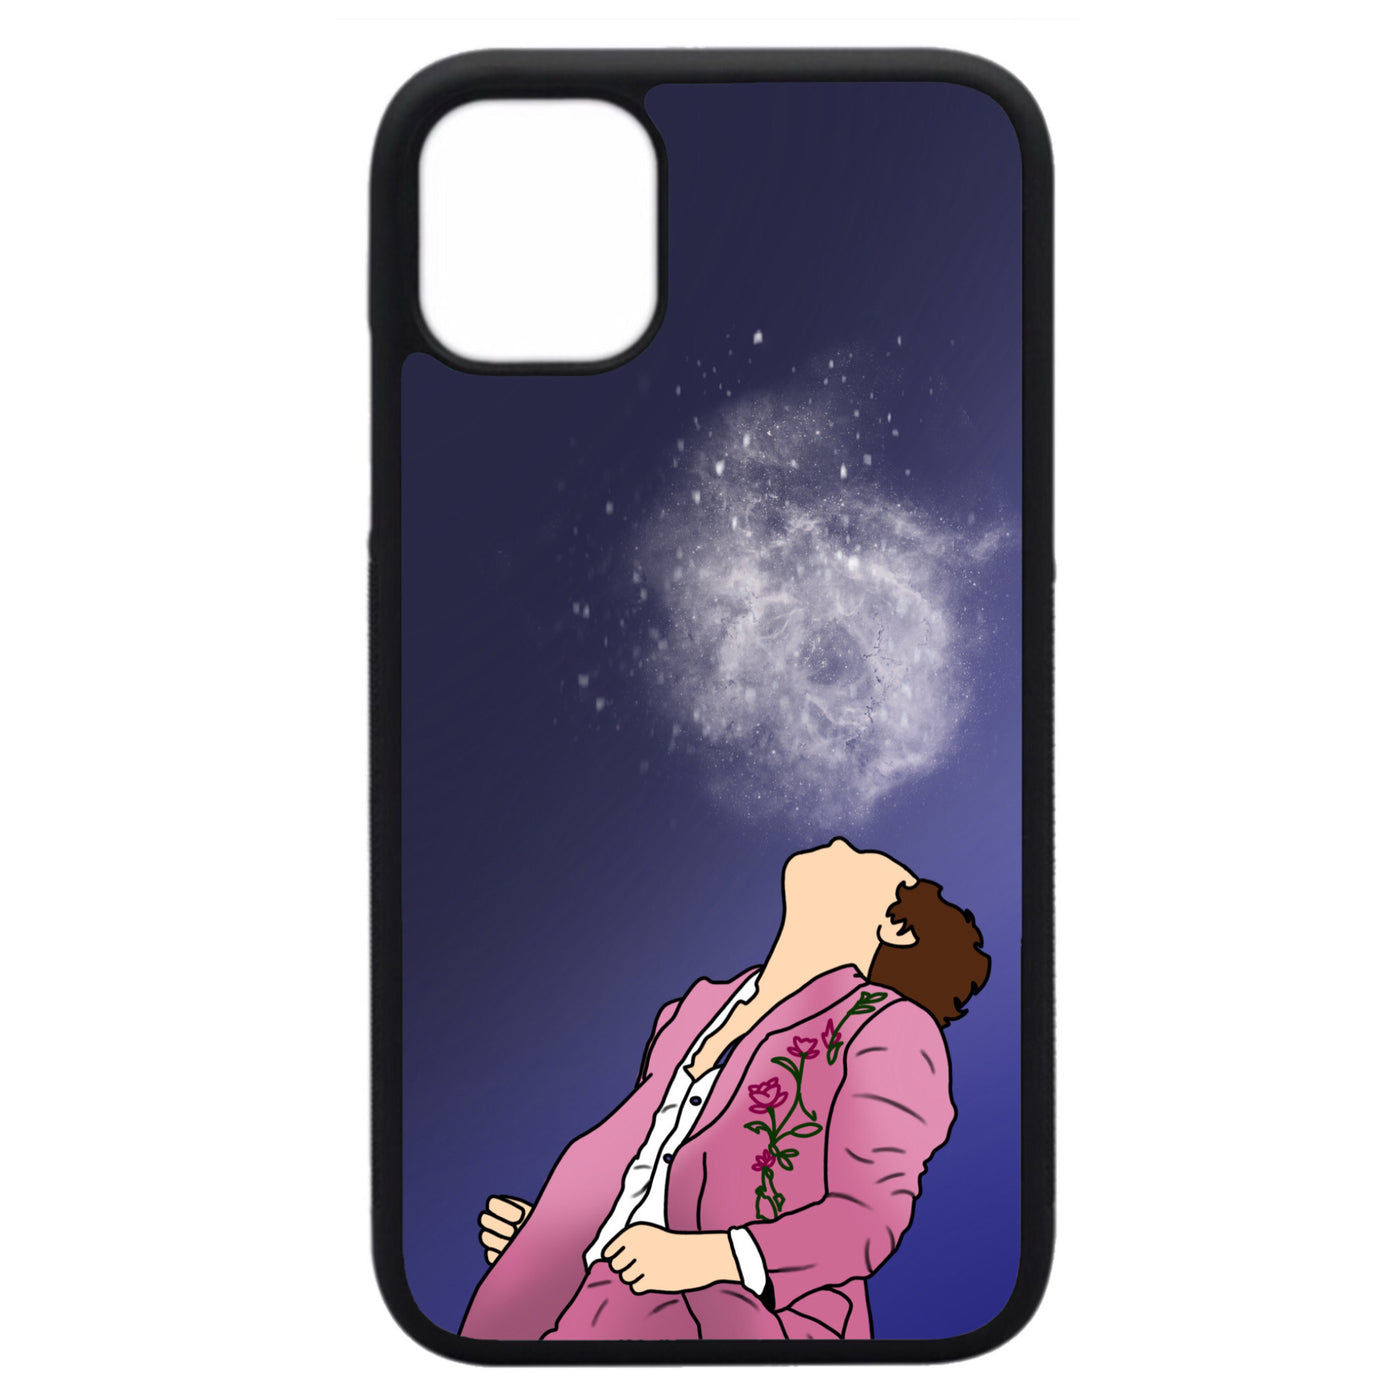 Whale Harry Case